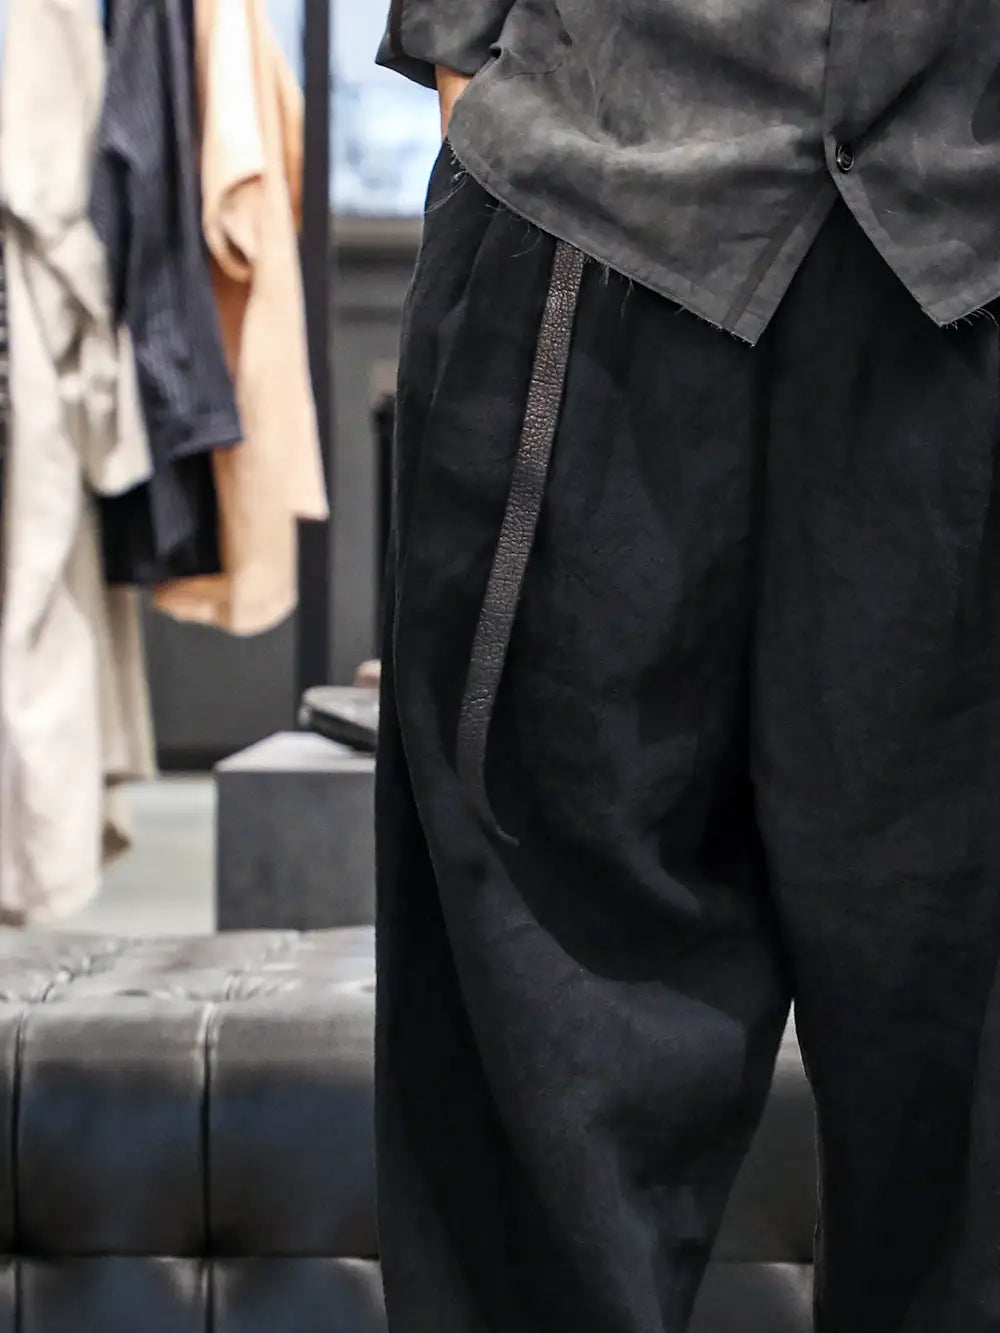 DEVOA Forme D'expression 24SS - Collaboration with refined classic pants and shoes - UP033 / 006B 2 Tucked Wide Leg Pants FWI-GDCT-Fade-Gray incarnation x DEVOA Shoe Horse Leather Garment Dye 3-004